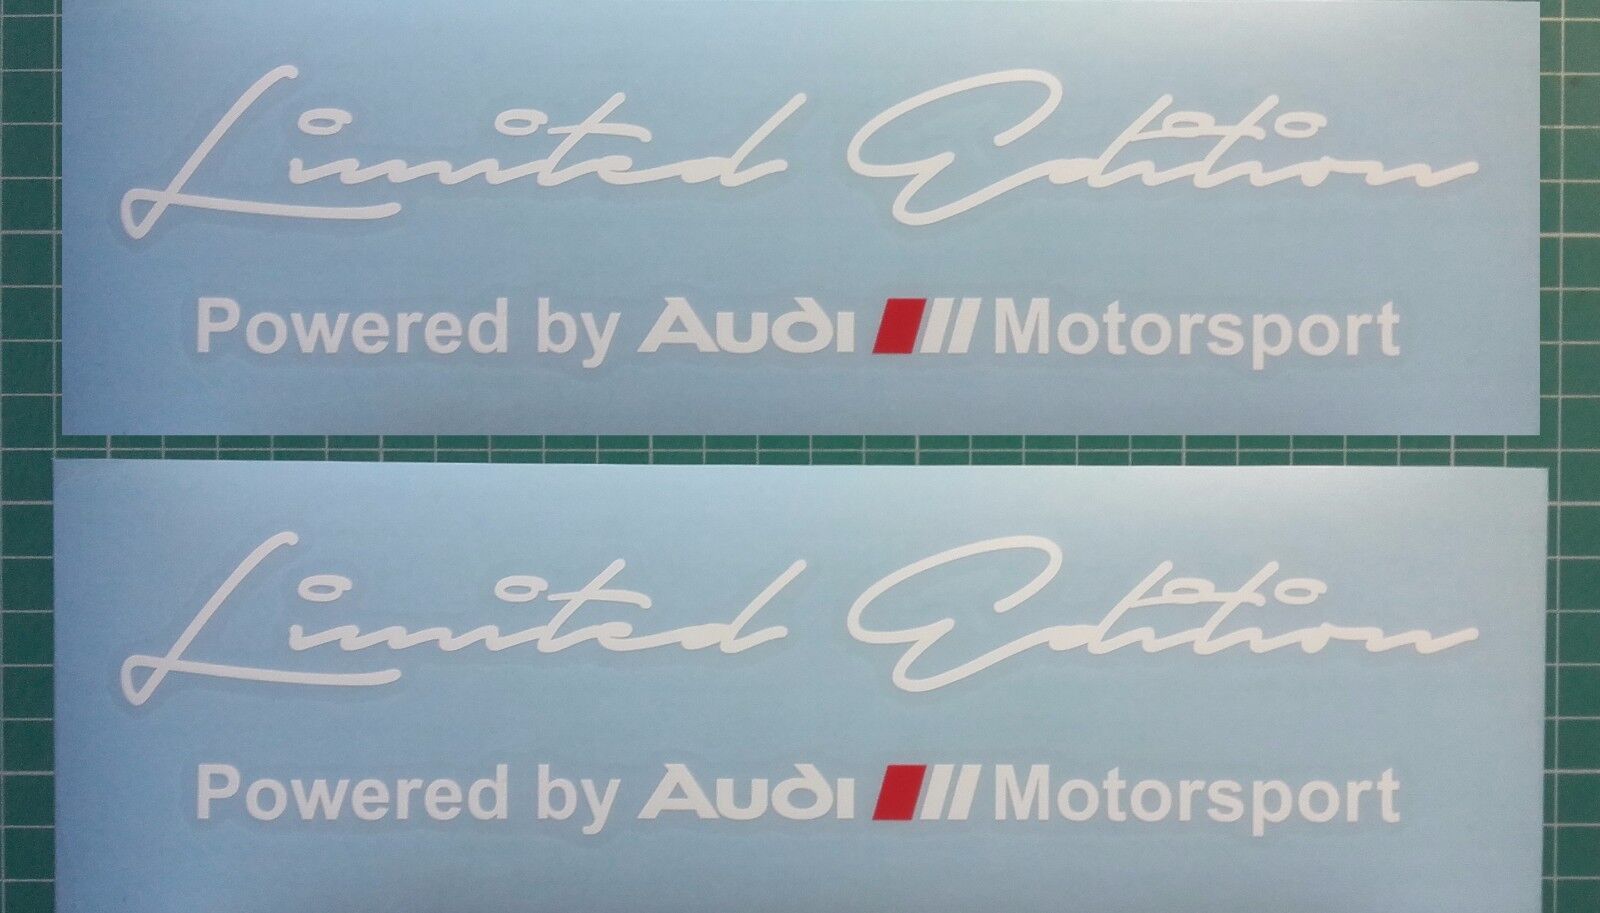 2 x Limited edition Audi Motorsport Decal Sticker compatible with Audi models 